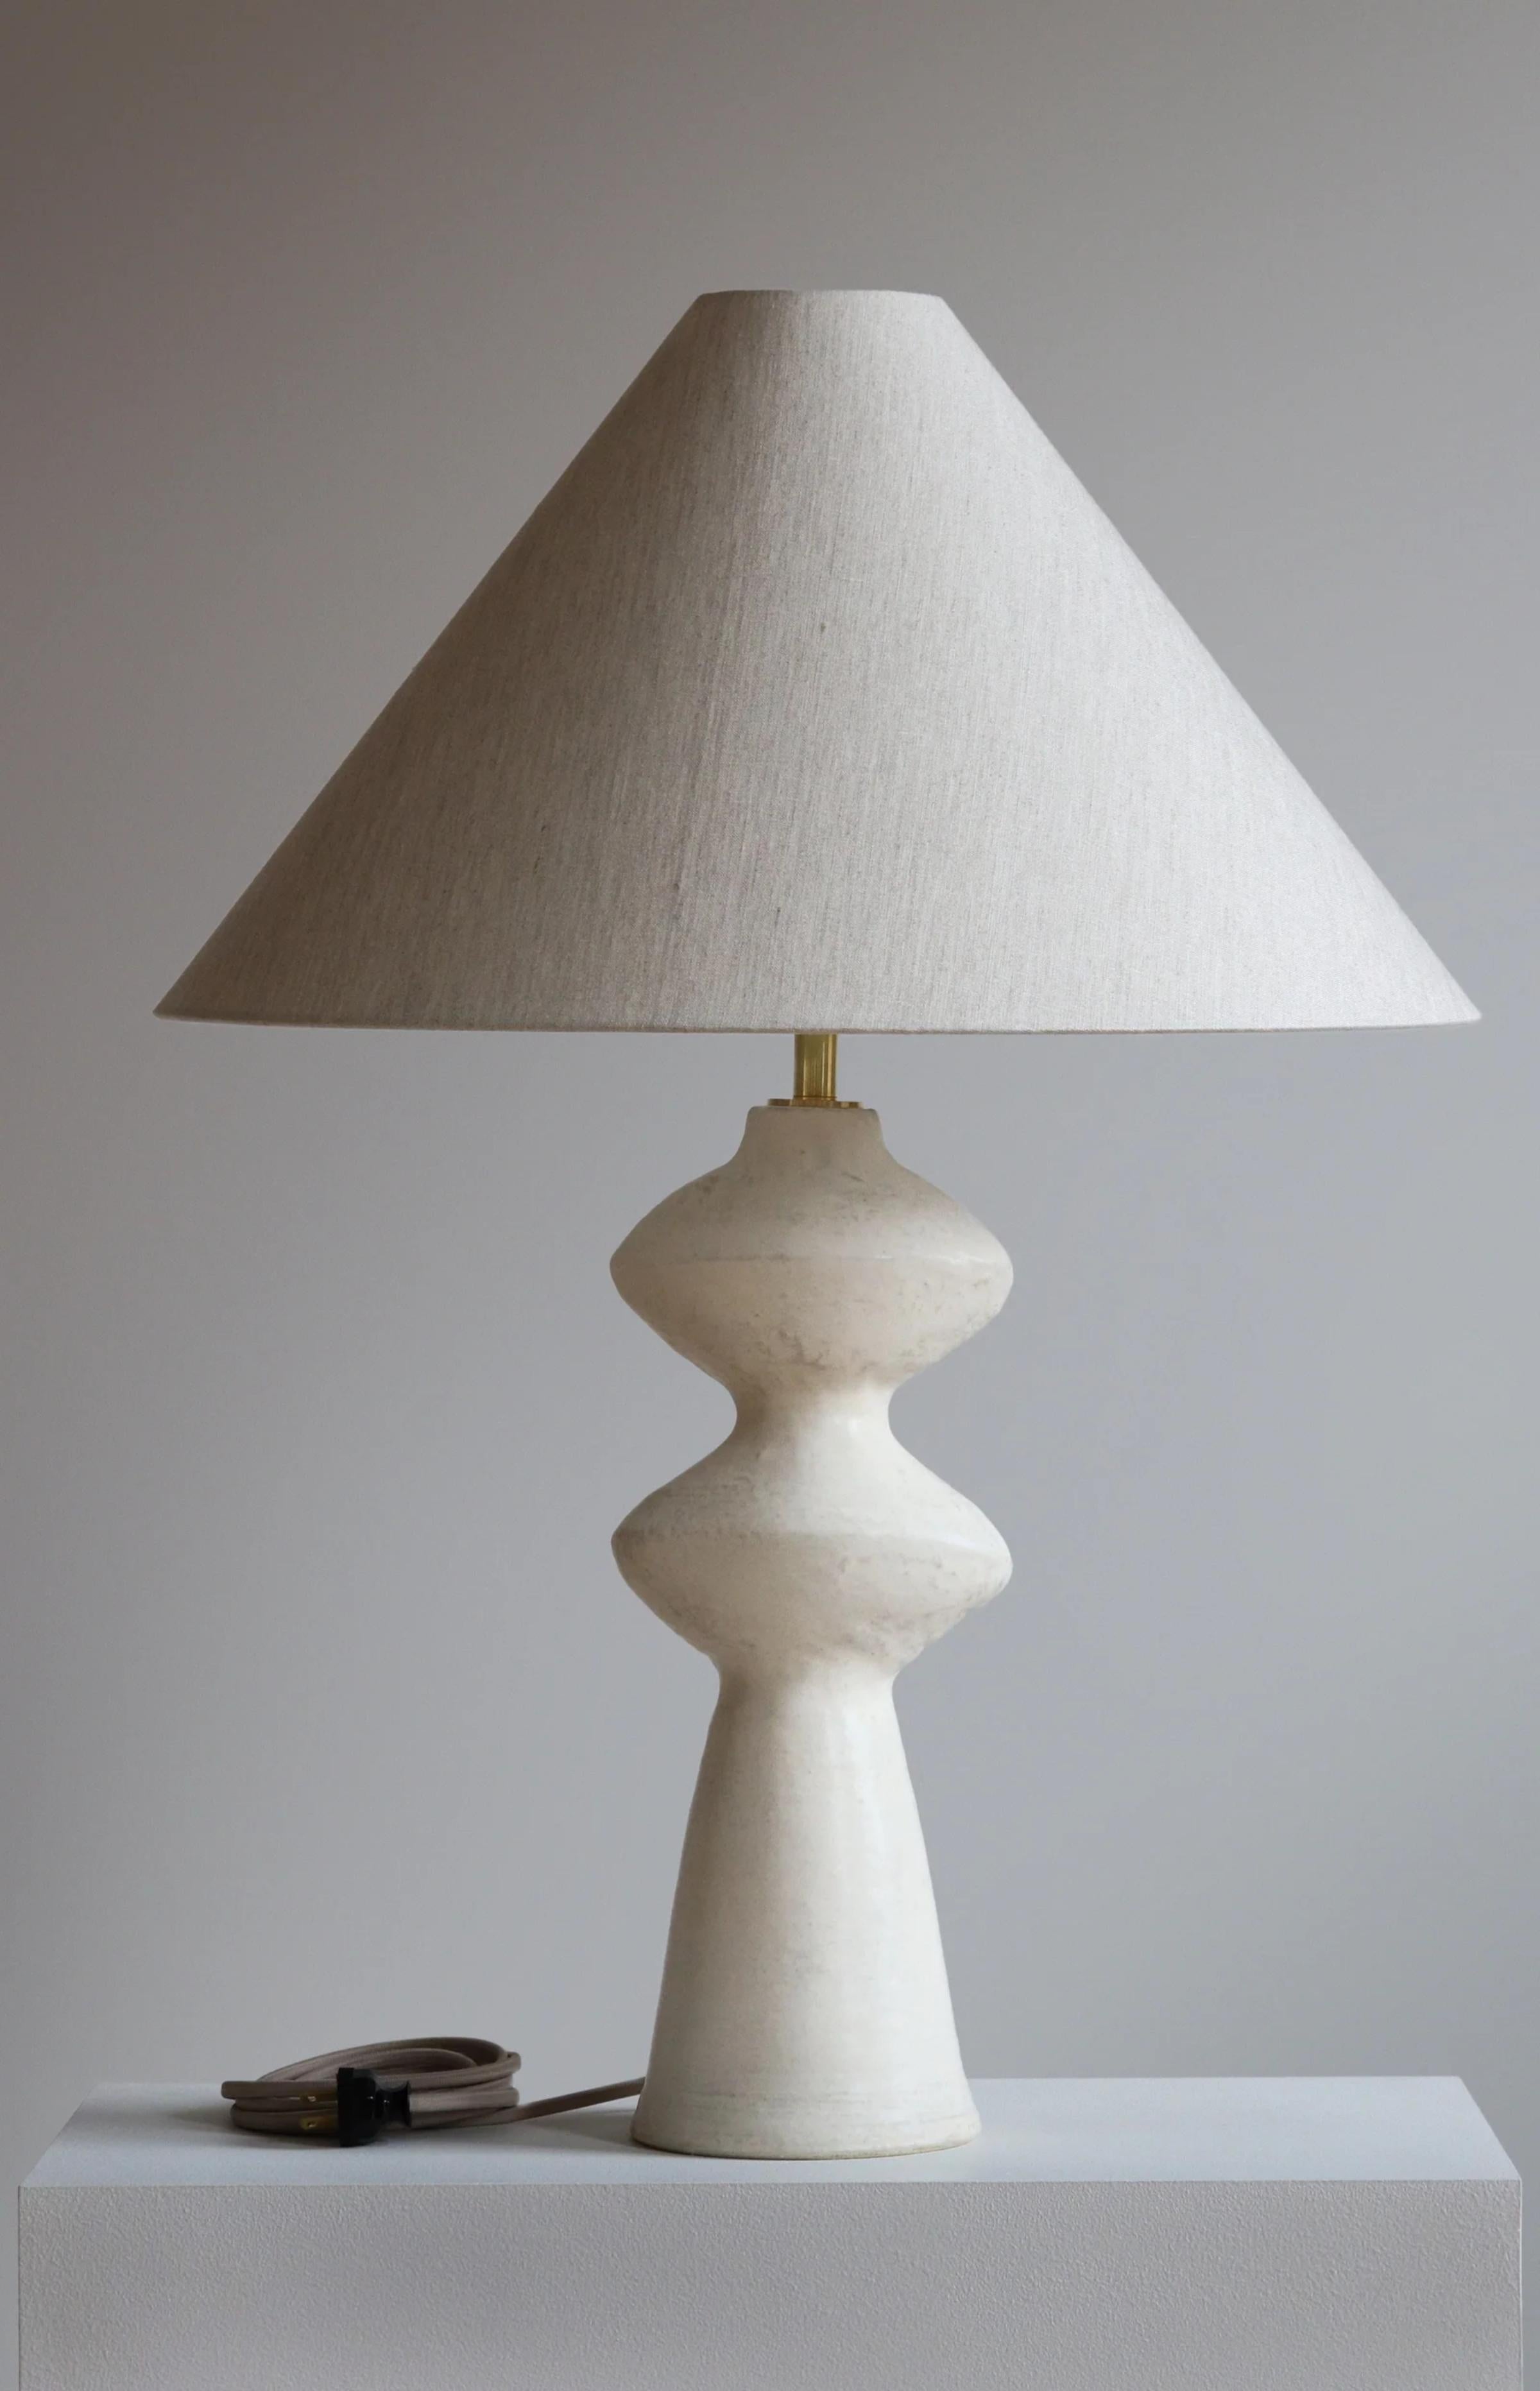 Stone Pollux 32 Table Lamp by Danny Kaplan Studio
Dimensions: ⌀ 56 x H 82 cm
Materials: Glazed Ceramic, Unfinished Brass, Wax Paper

This item is handmade, and may exhibit variability within the same piece. We do our best to maintain a consistent